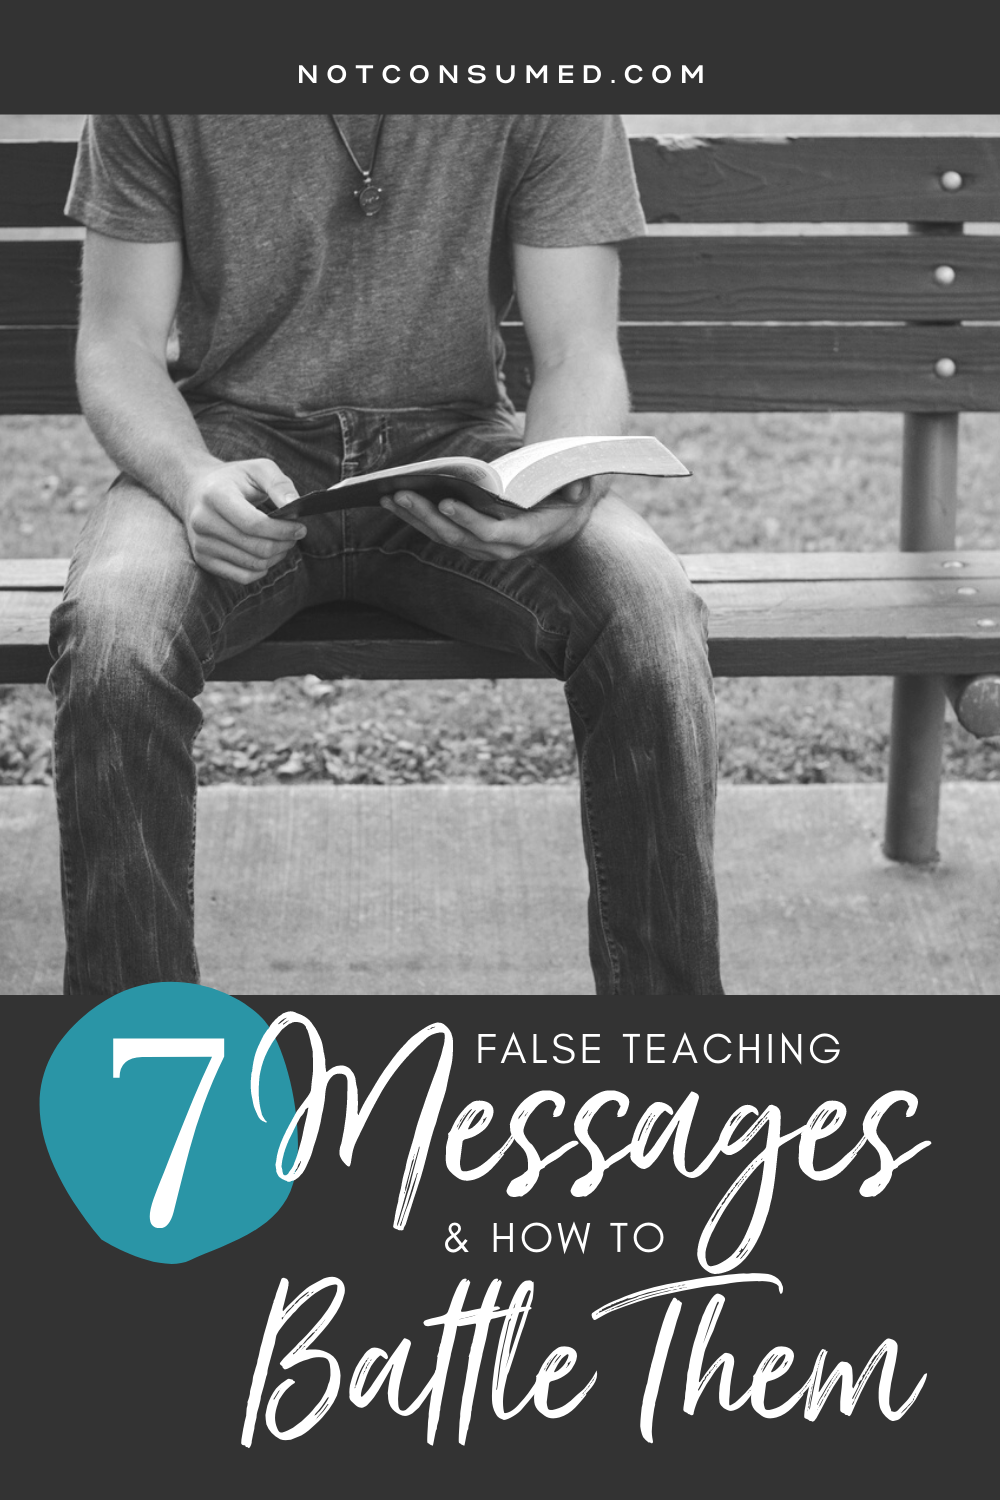 7 false teaching messages and how to battle them